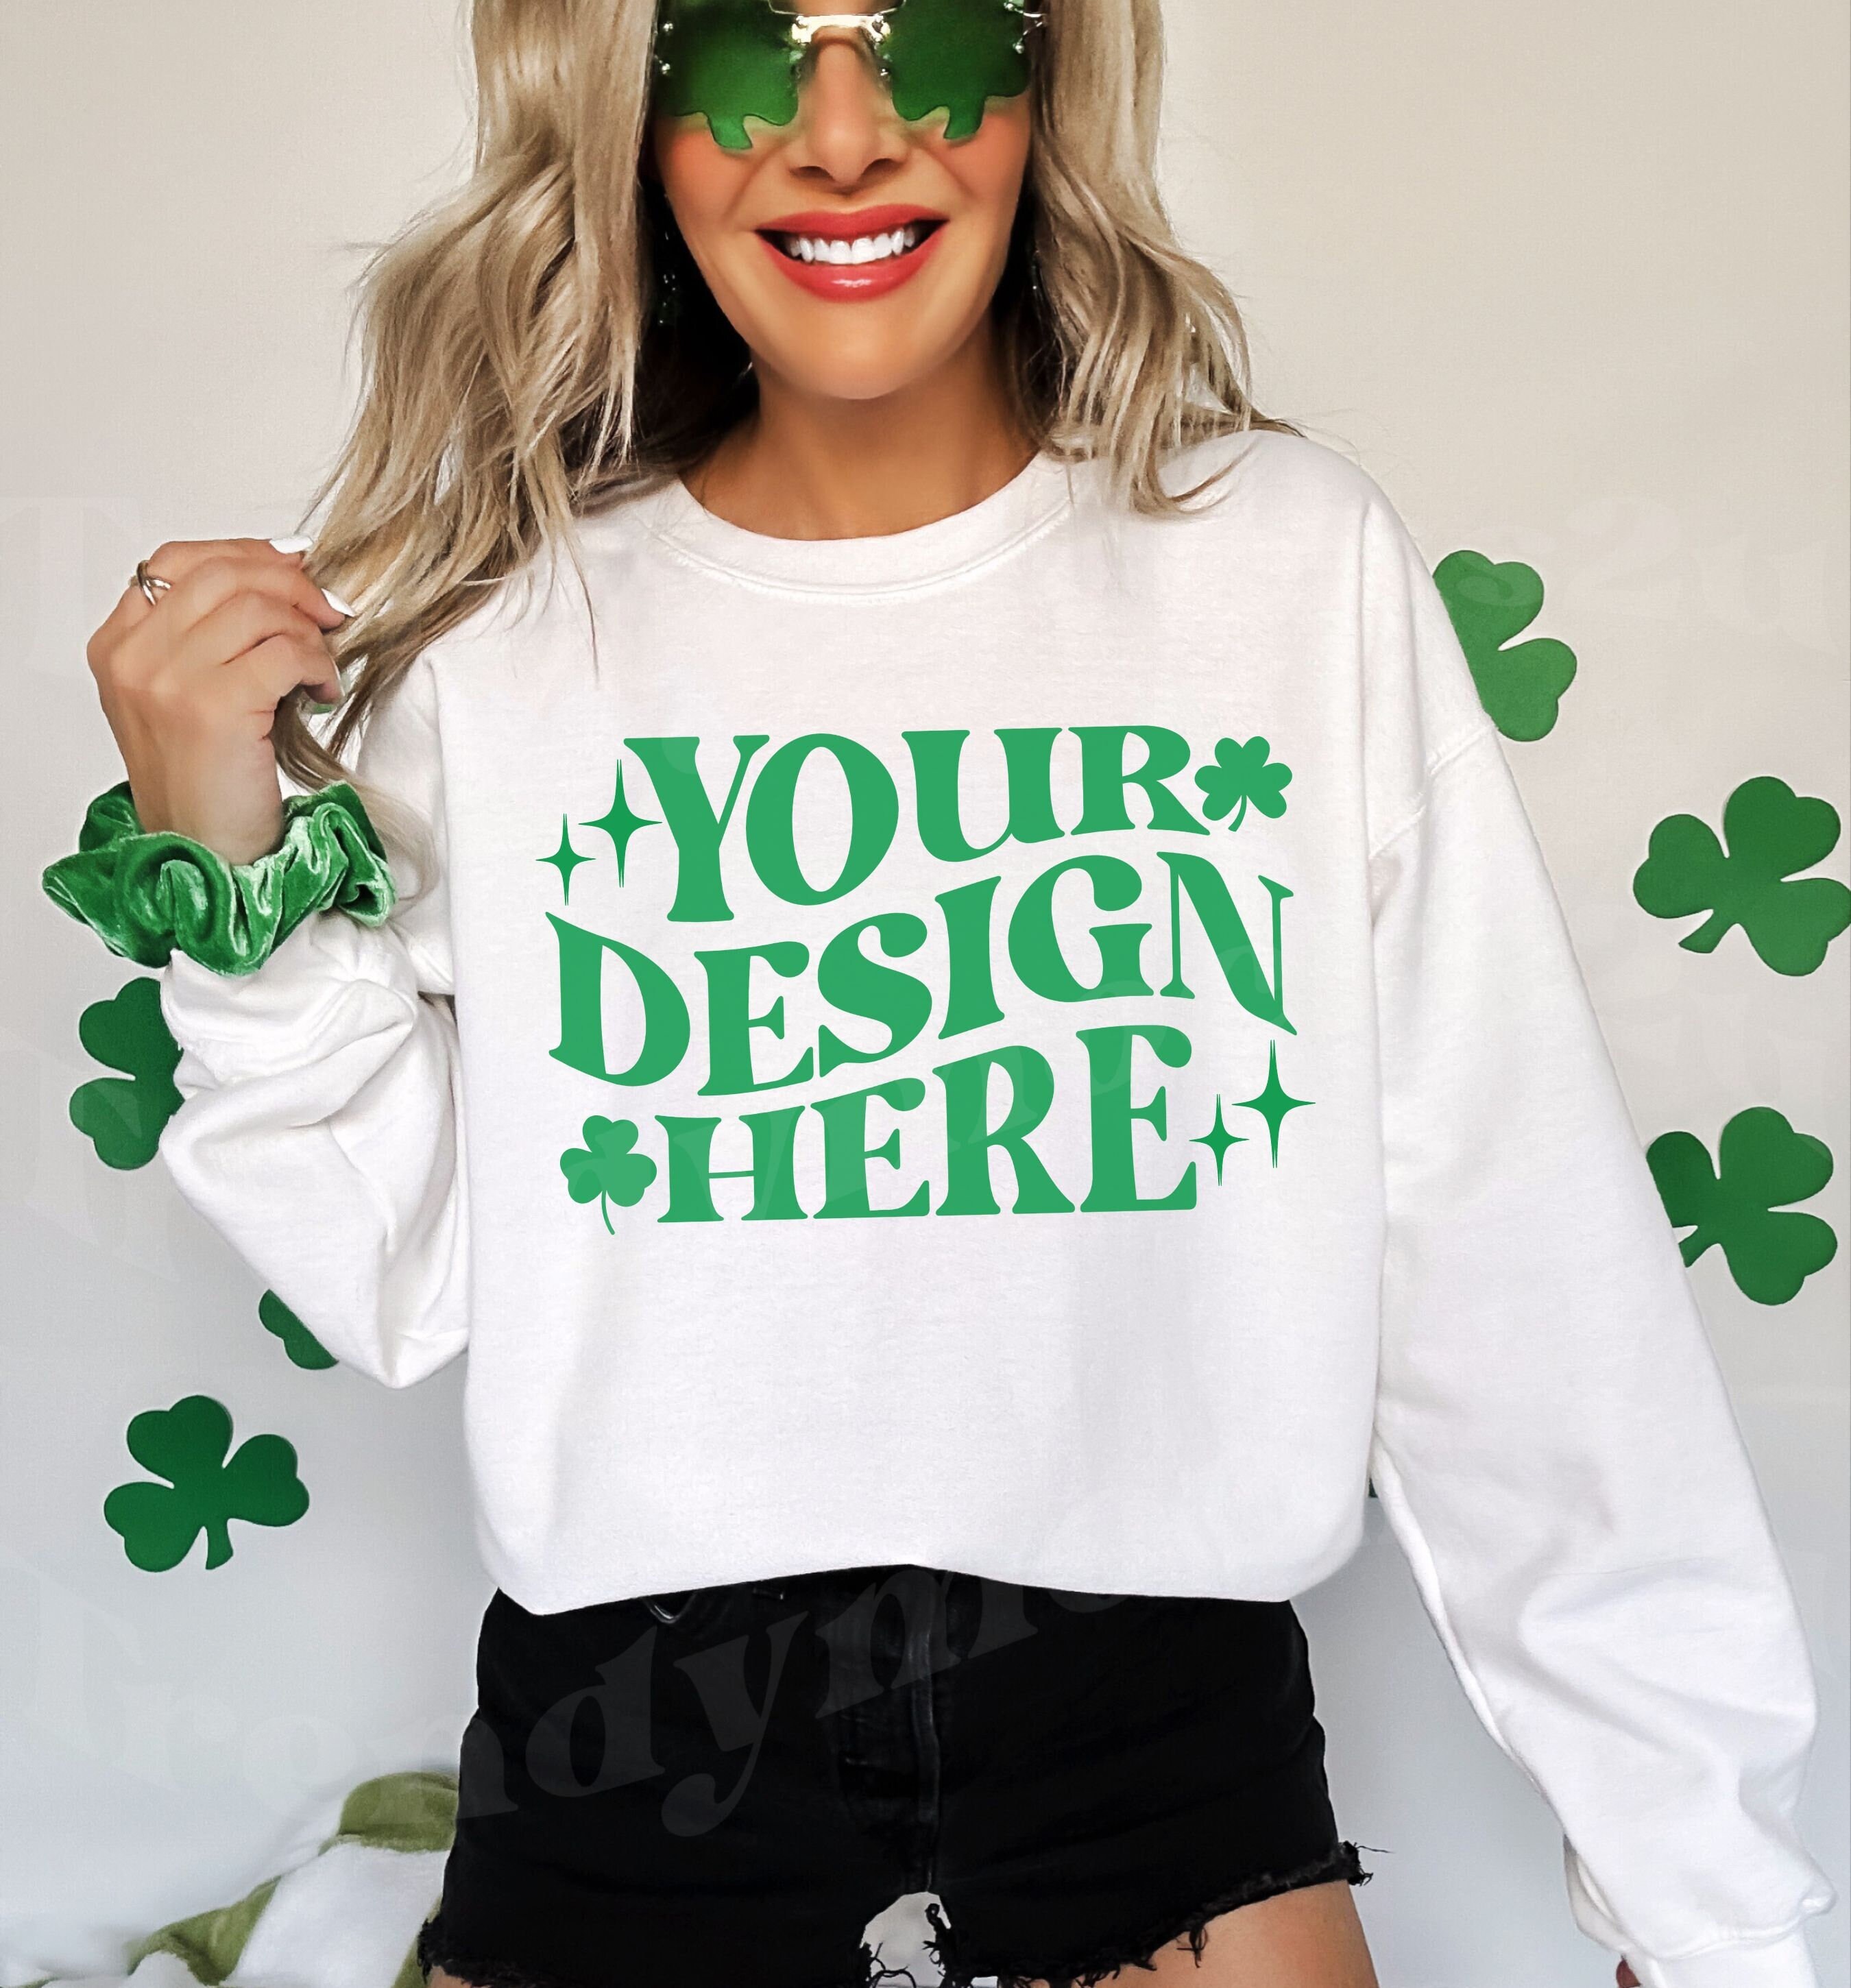 St. Patrick's Day Womens Sweatshirts Green Gnome Graphic Long Sleeves Plus  Size Loose Fit Hoodie Pullover Tops 